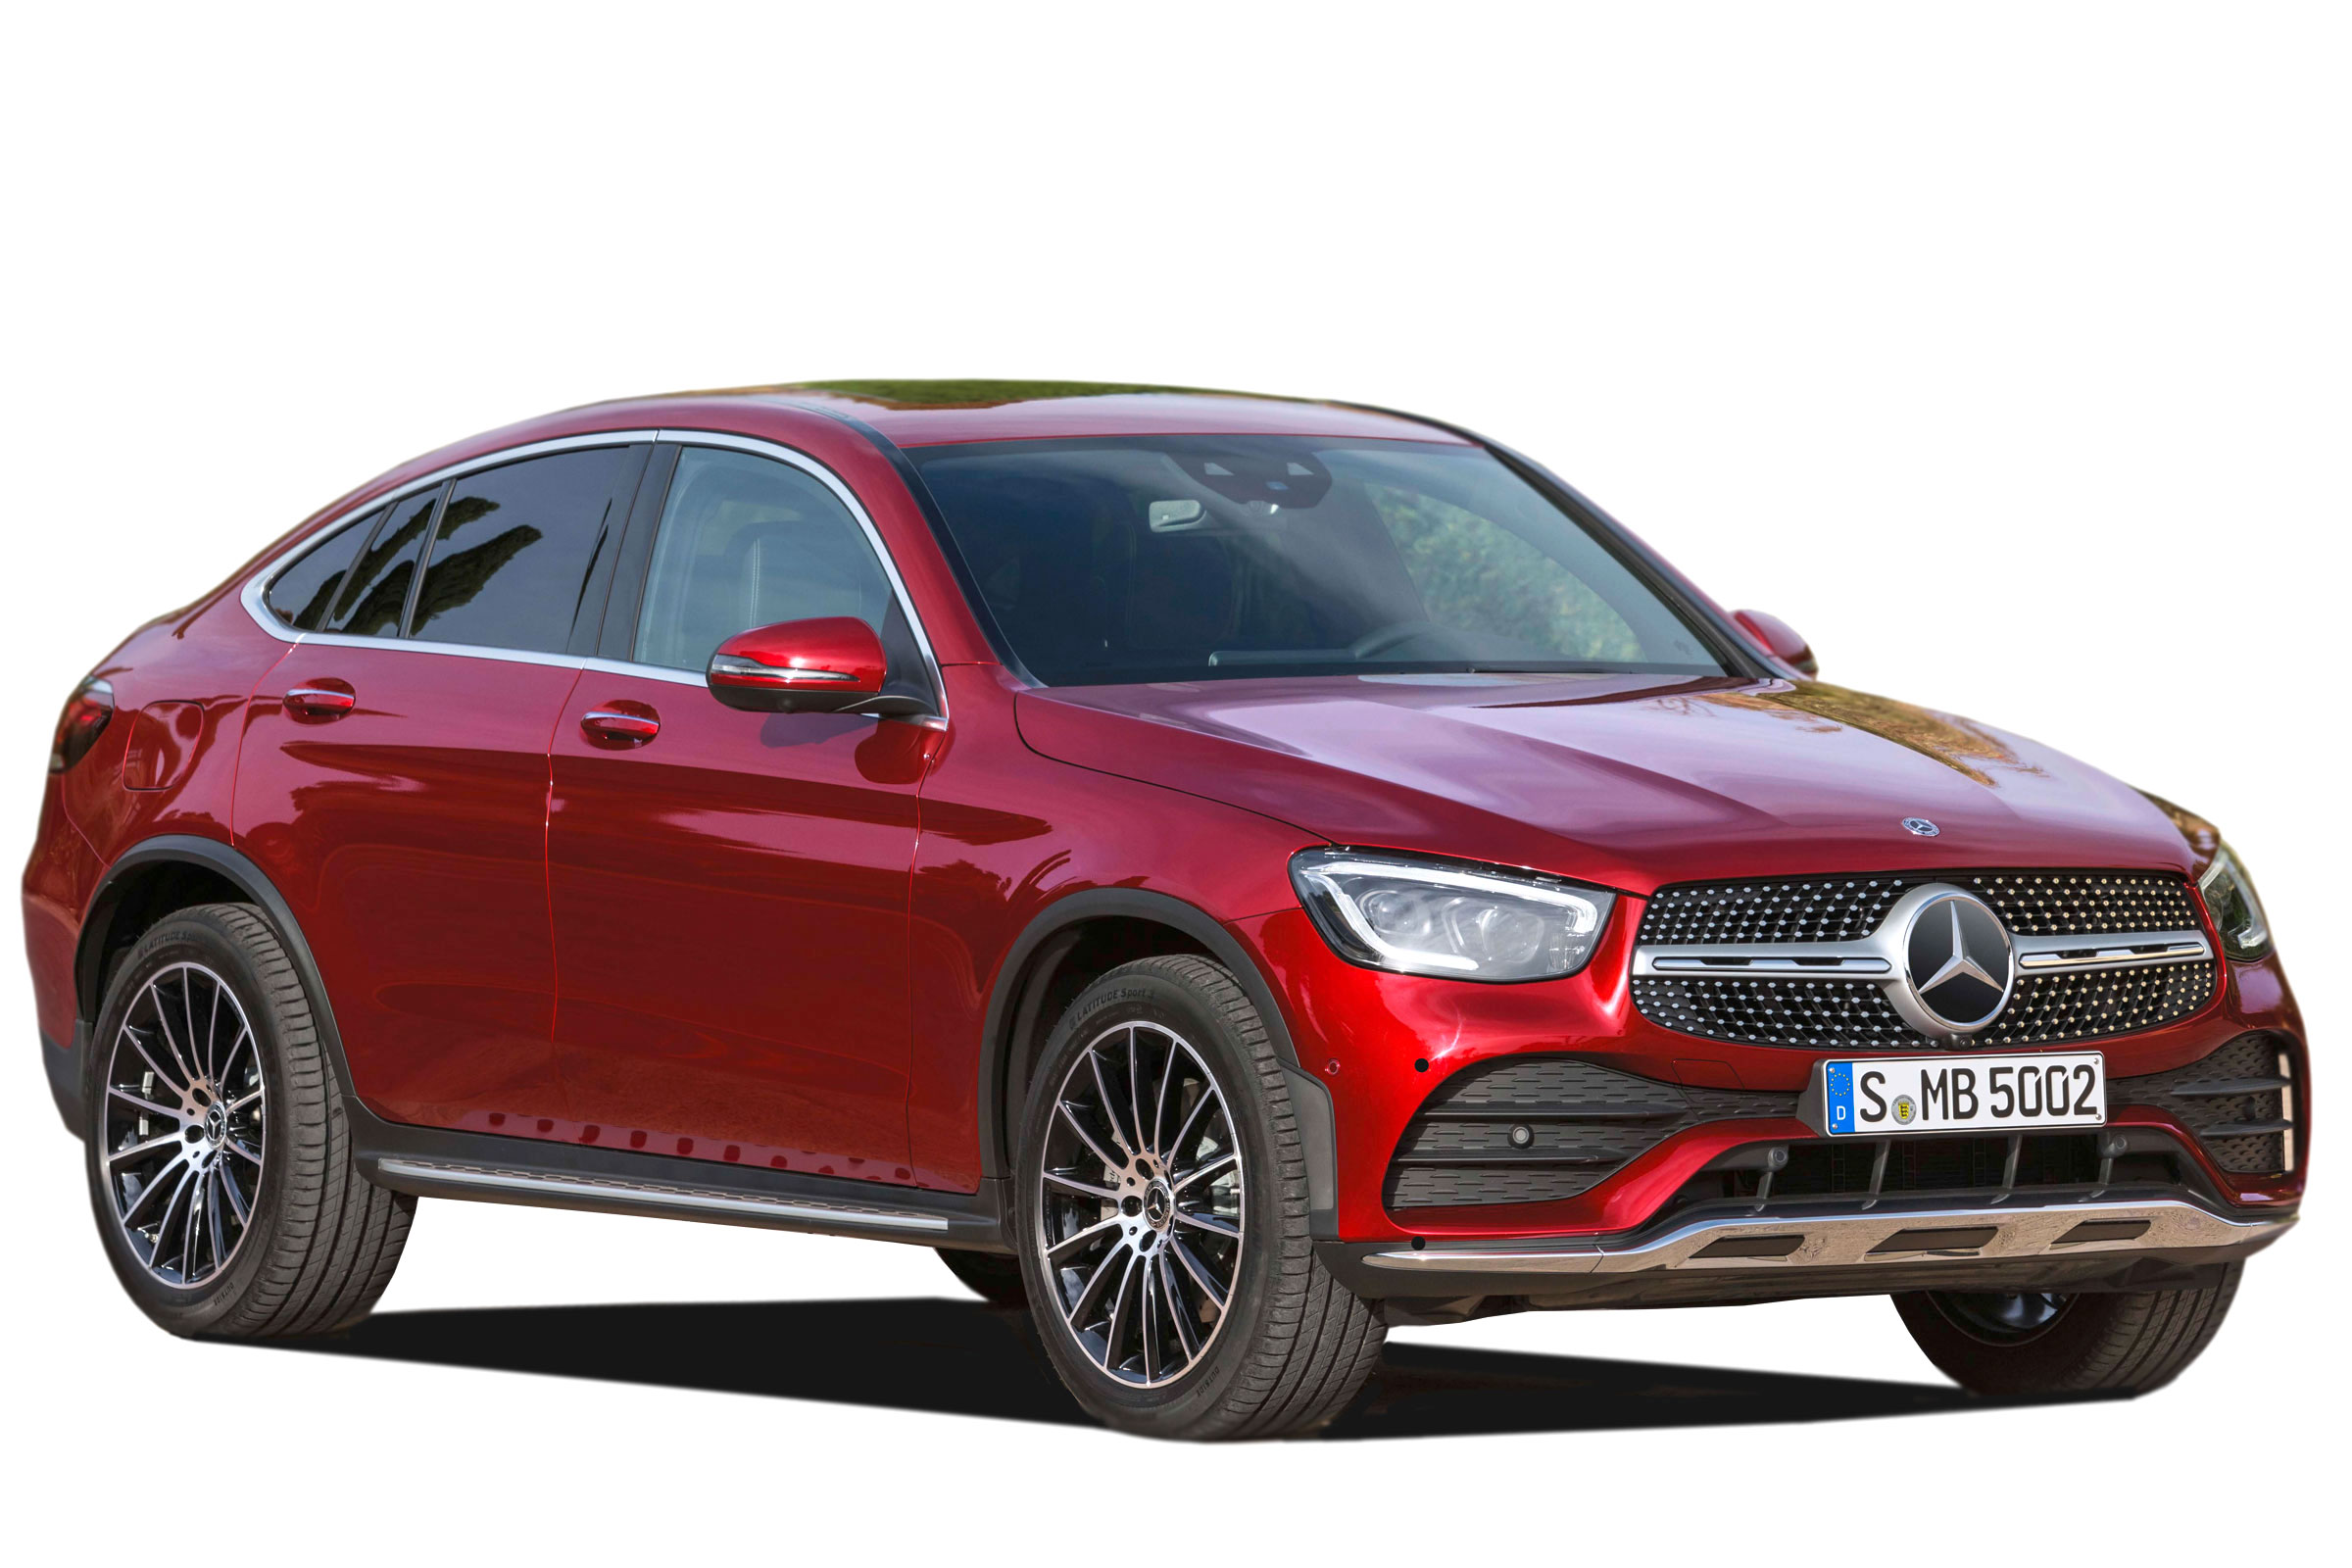 Mercedes Glc Coupe Suv Review Carbuyer